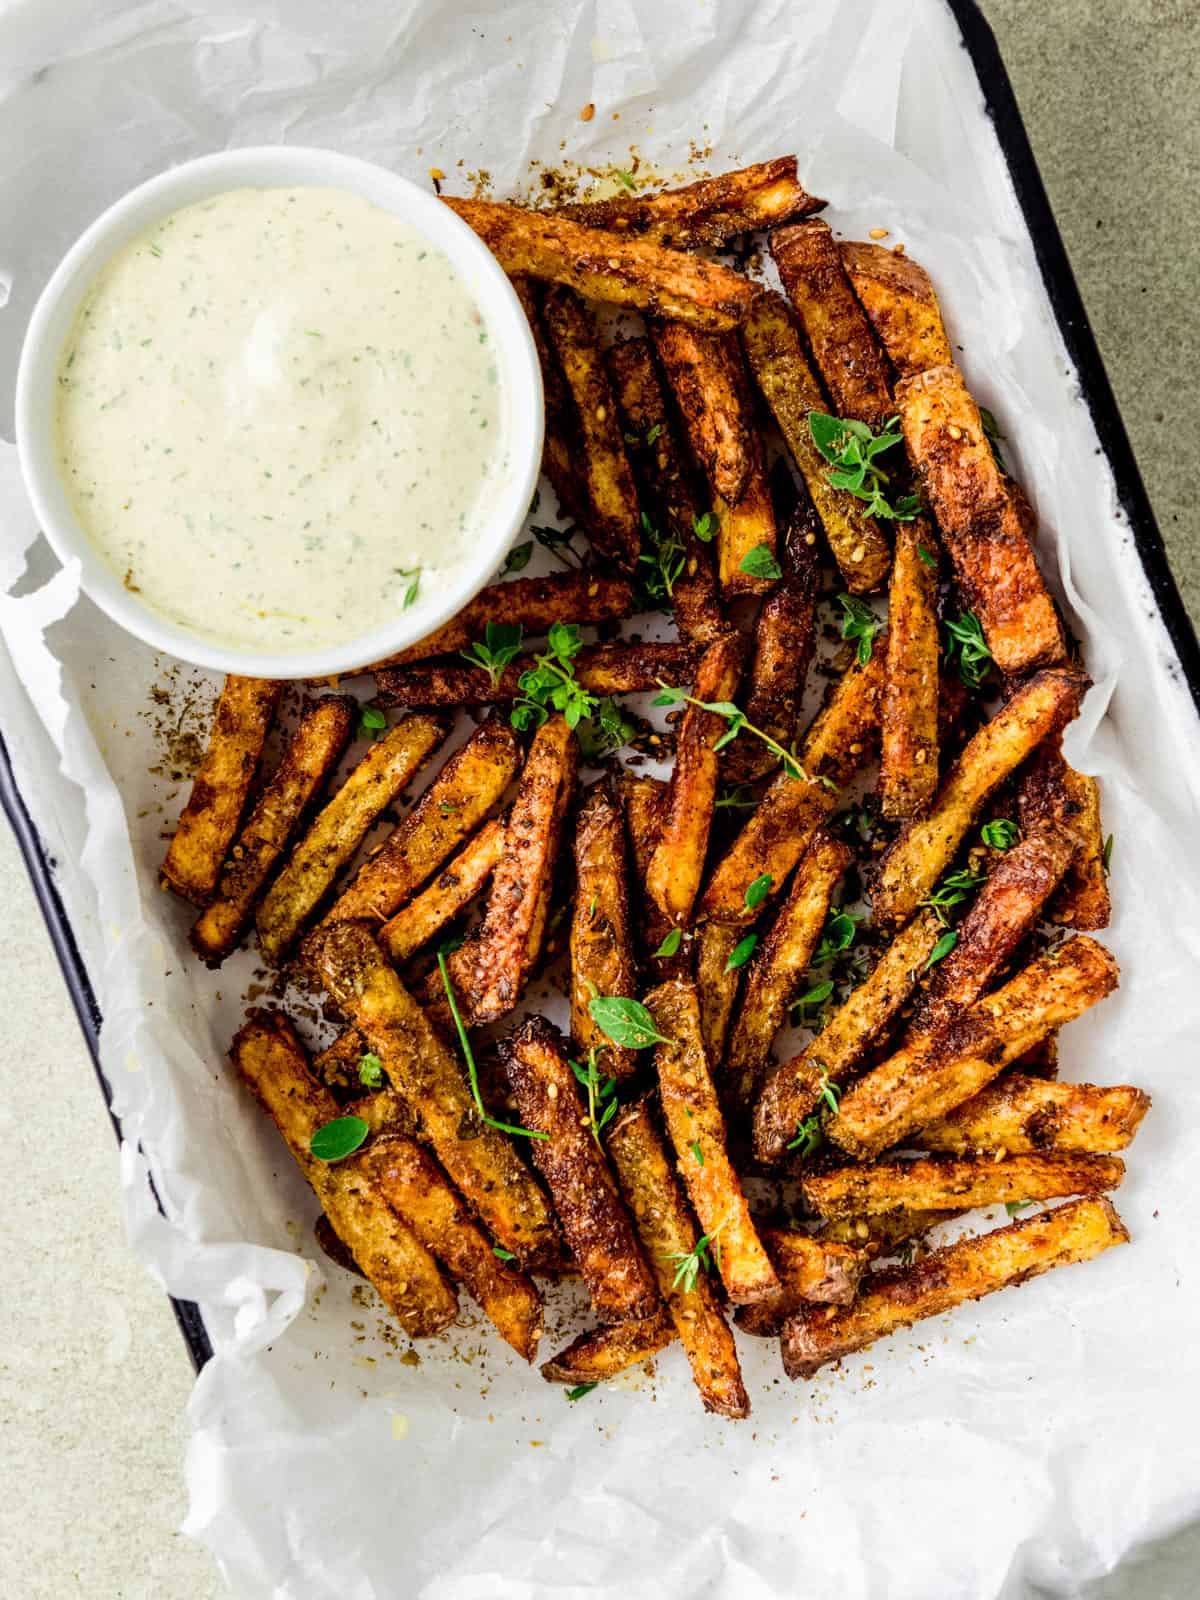 Baked zaatar fries served with creamy tahini sauce on the side.